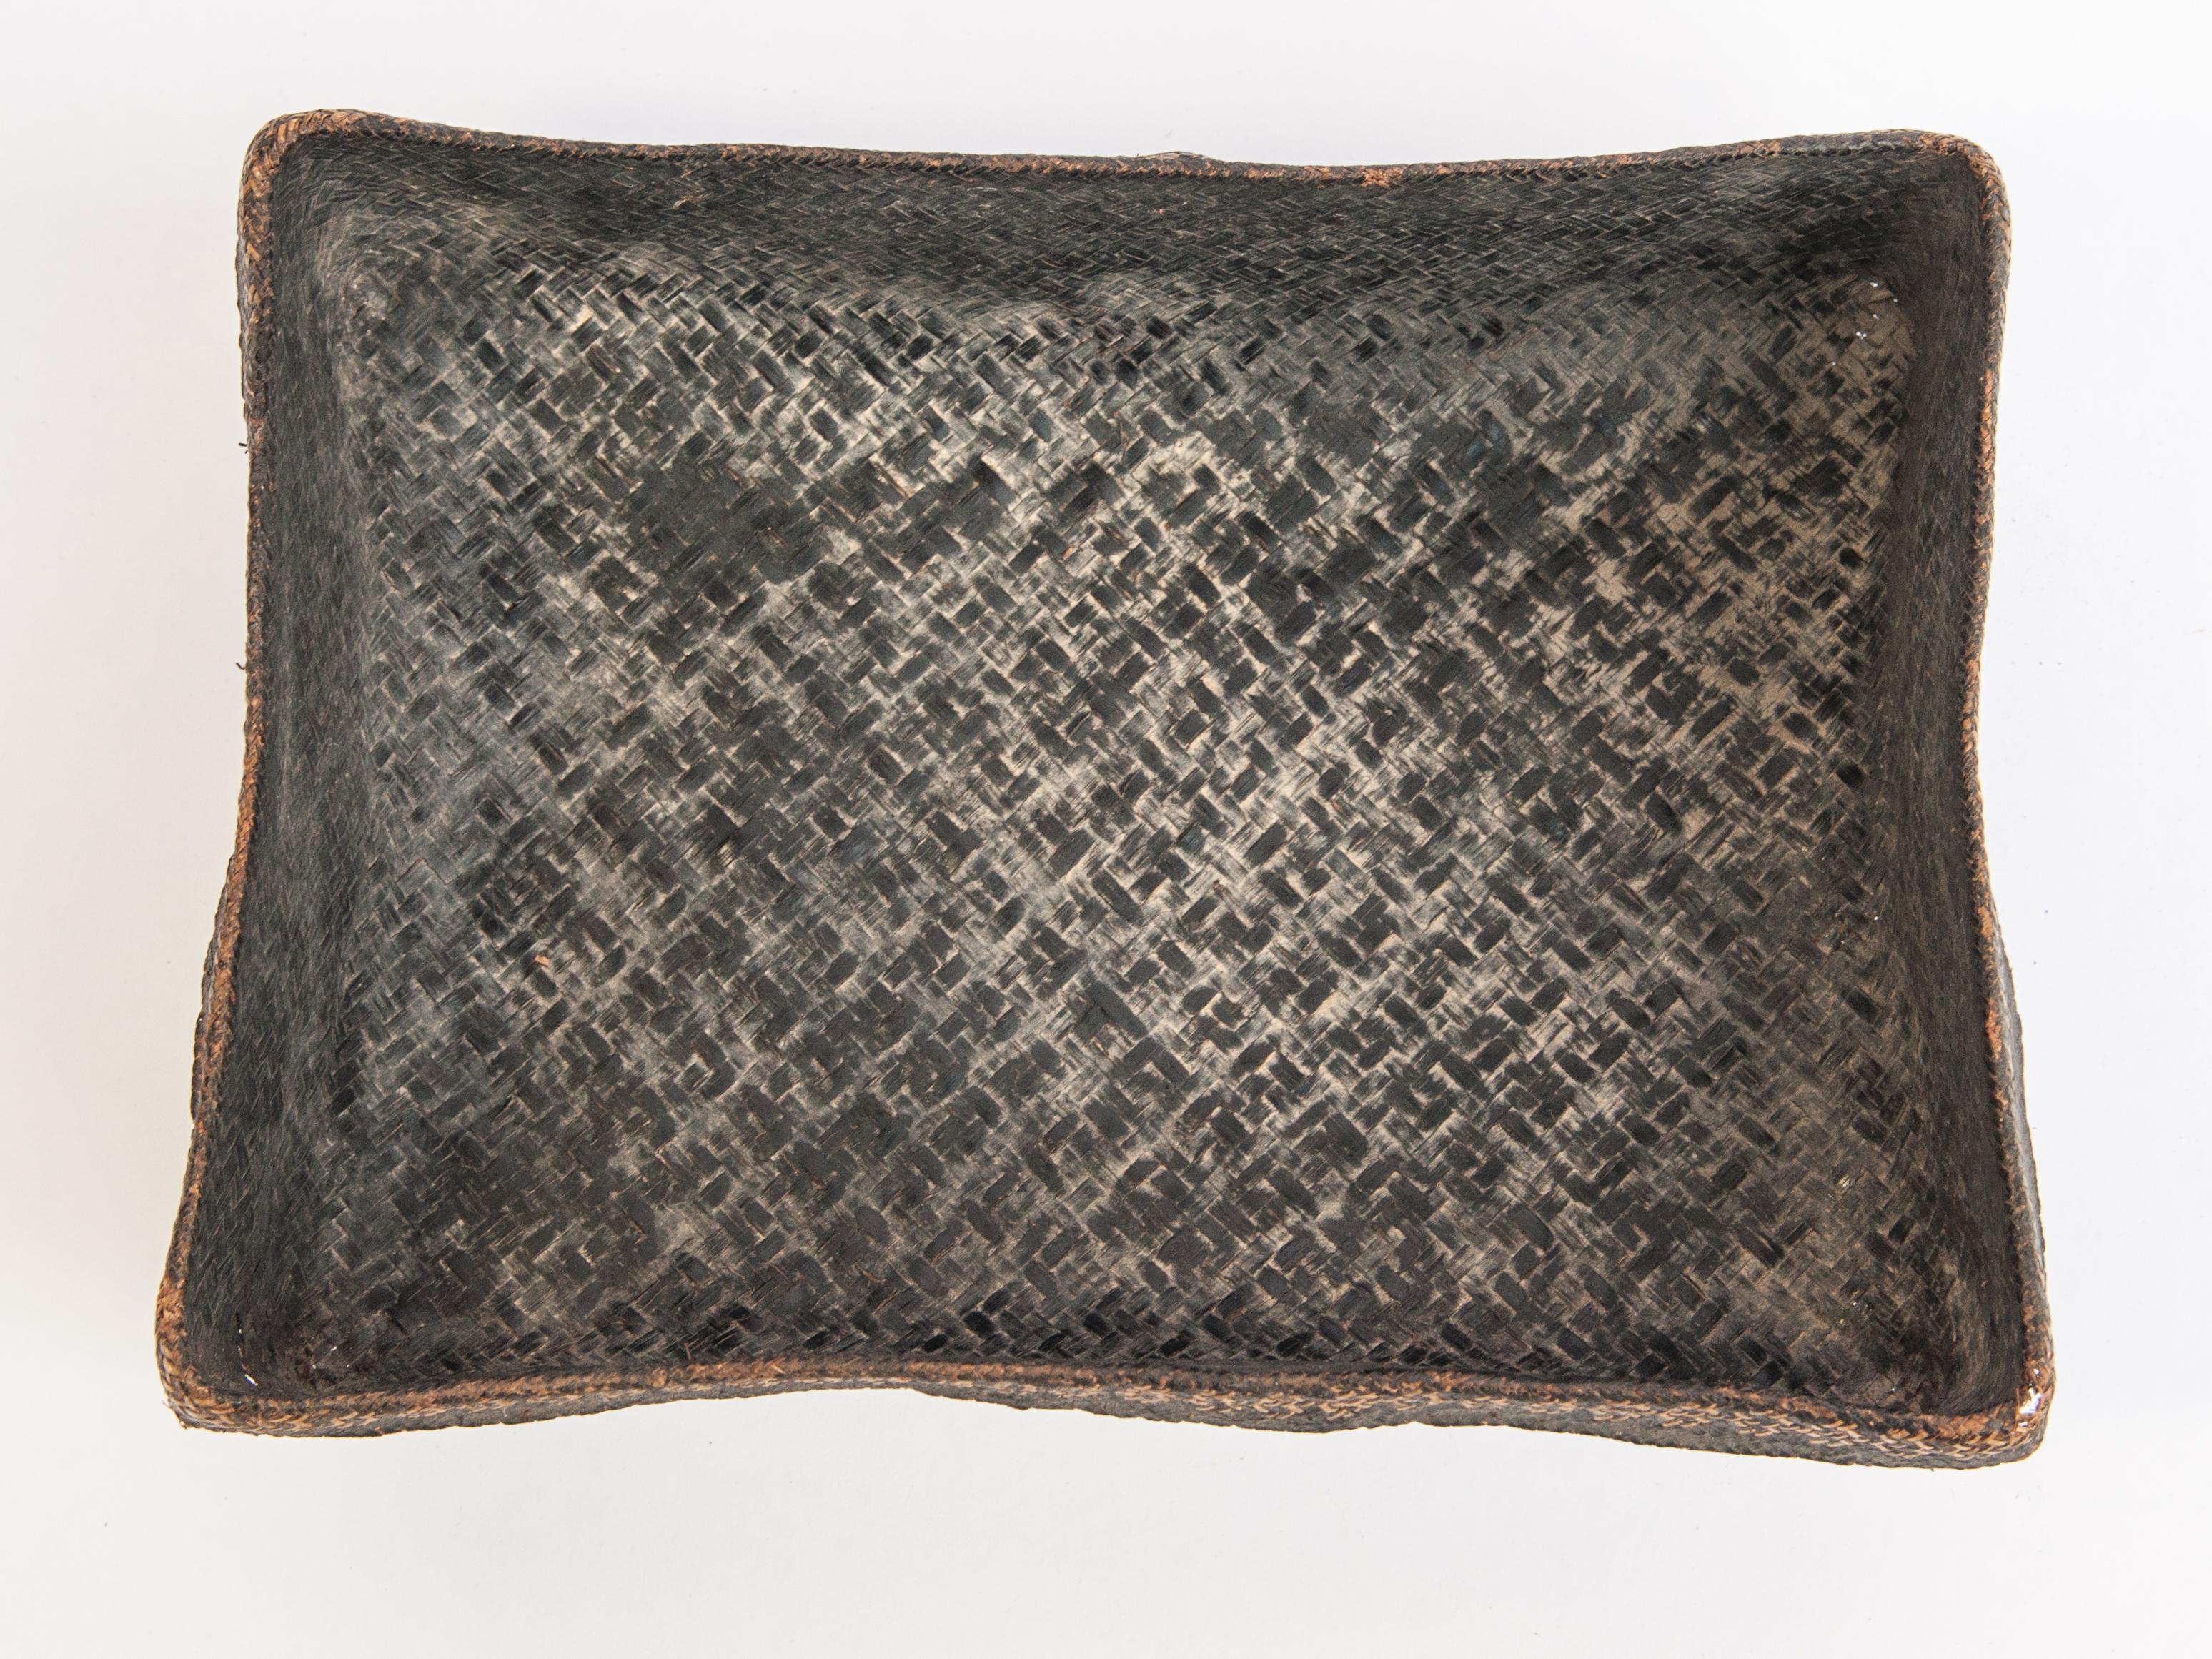 Betel Basket with Woven Design, Lampung, Sumatra Late 19th to Early 20th Century 6